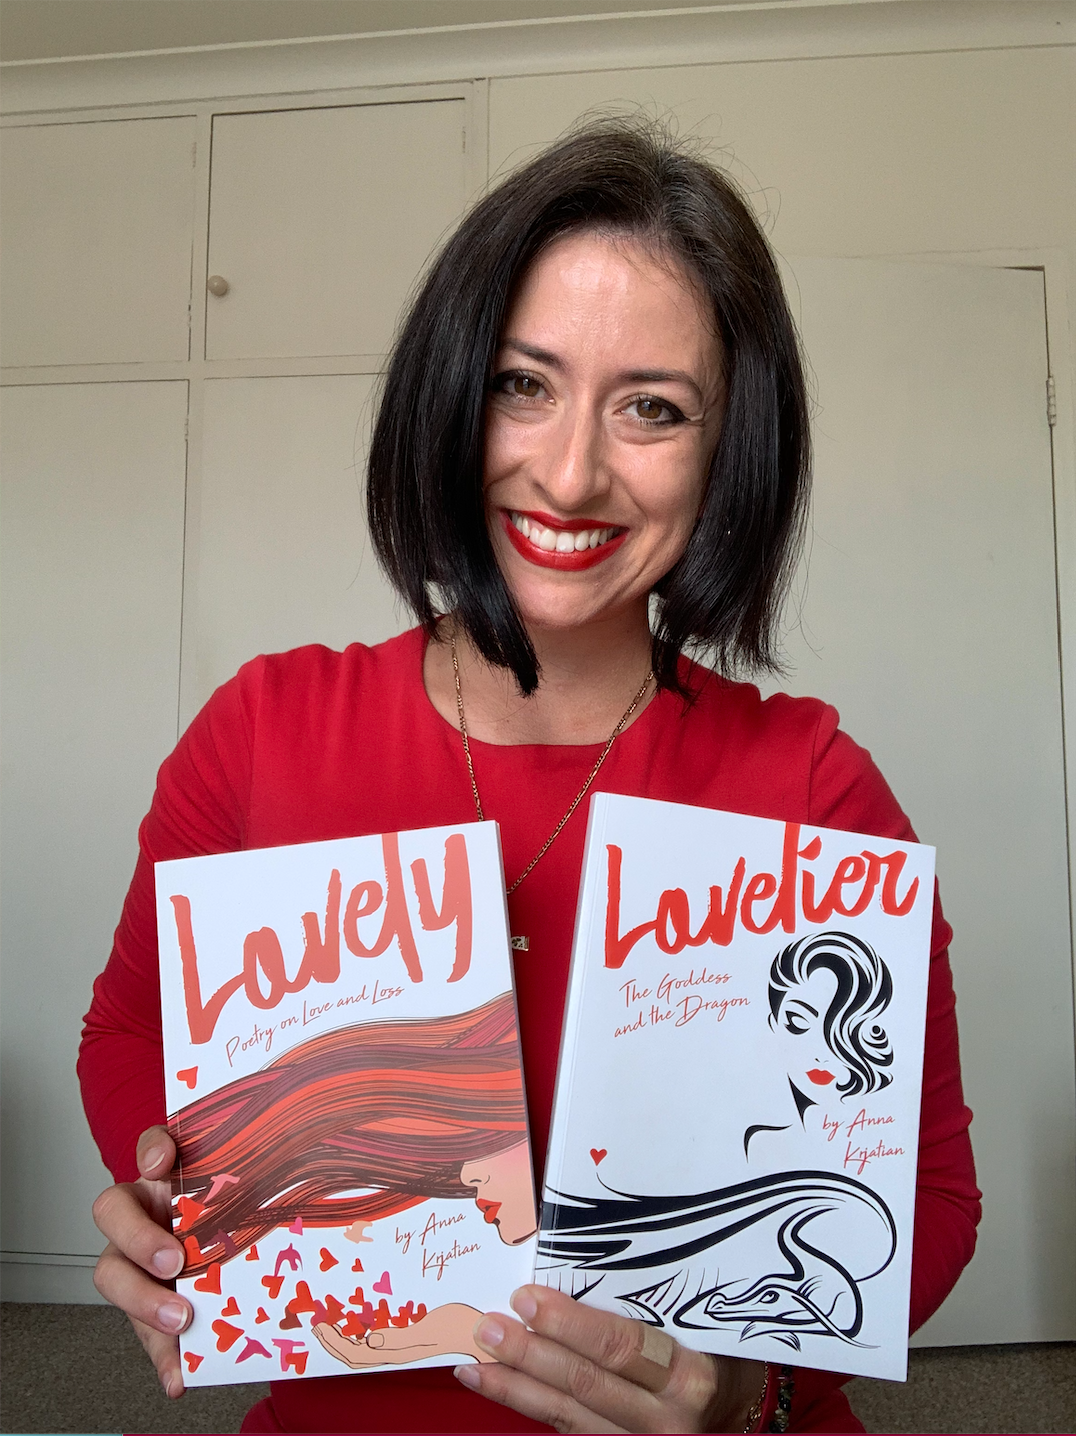 Anna Krjatian, author, biohacker,  entrepreneur and found of "The Butterfly" wears a red dress, and holds two books she's written: "Lovely - Poetry on Love and Loss" and "Lovelier - The  Goddess and The Dragon".